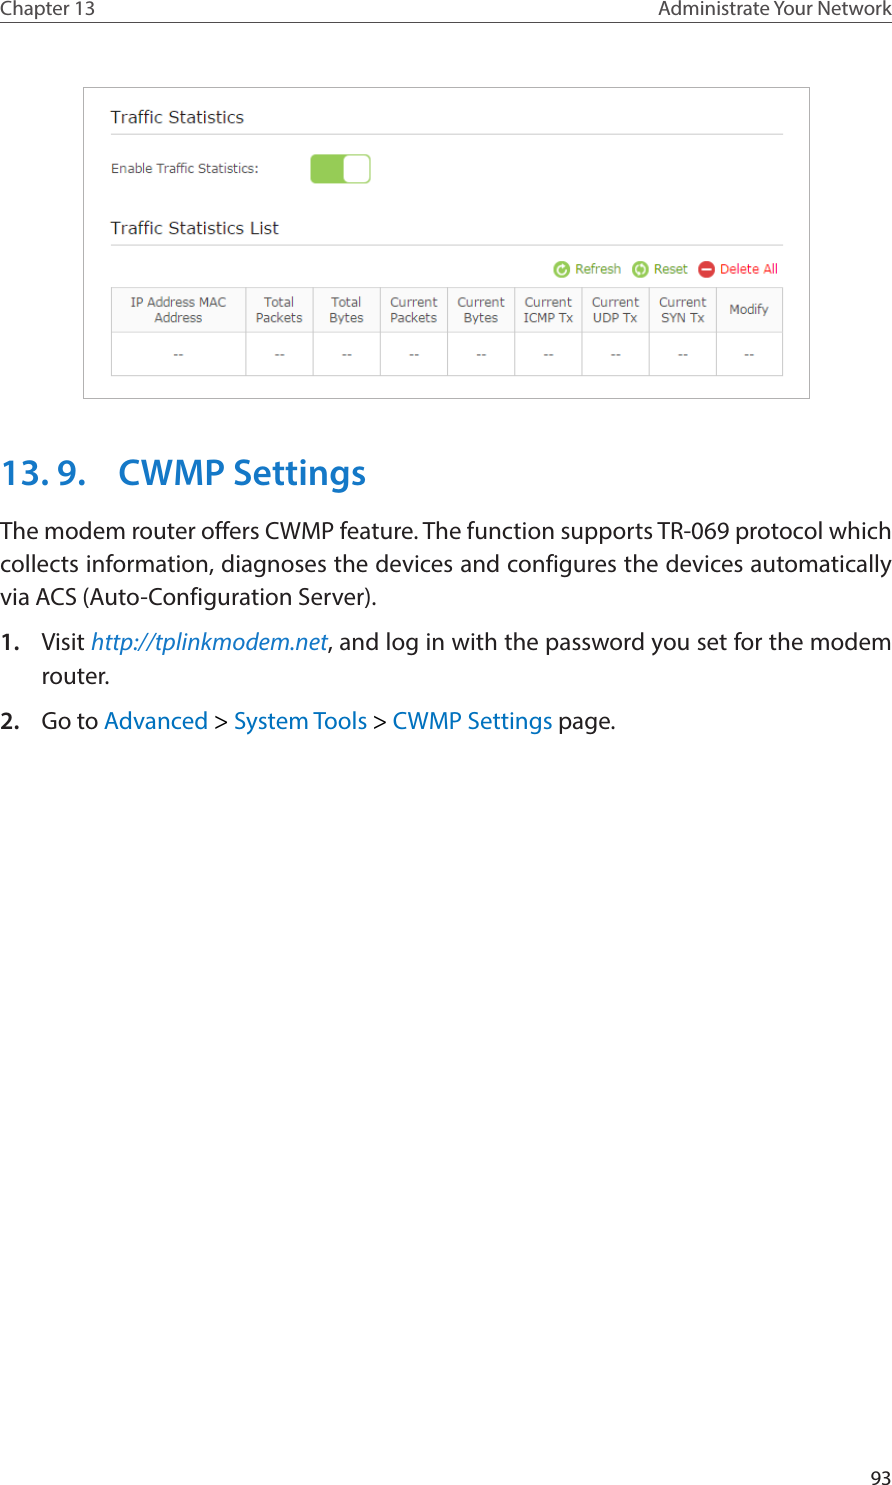 93Chapter 13 Administrate Your Network 13. 9.  CWMP SettingsThe modem router offers CWMP feature. The function supports TR-069 protocol which collects information, diagnoses the devices and configures the devices automatically via ACS (Auto-Configuration Server). 1.  Visit http://tplinkmodem.net, and log in with the password you set for the modem router.2.  Go to Advanced &gt; System Tools &gt; CWMP Settings page. 